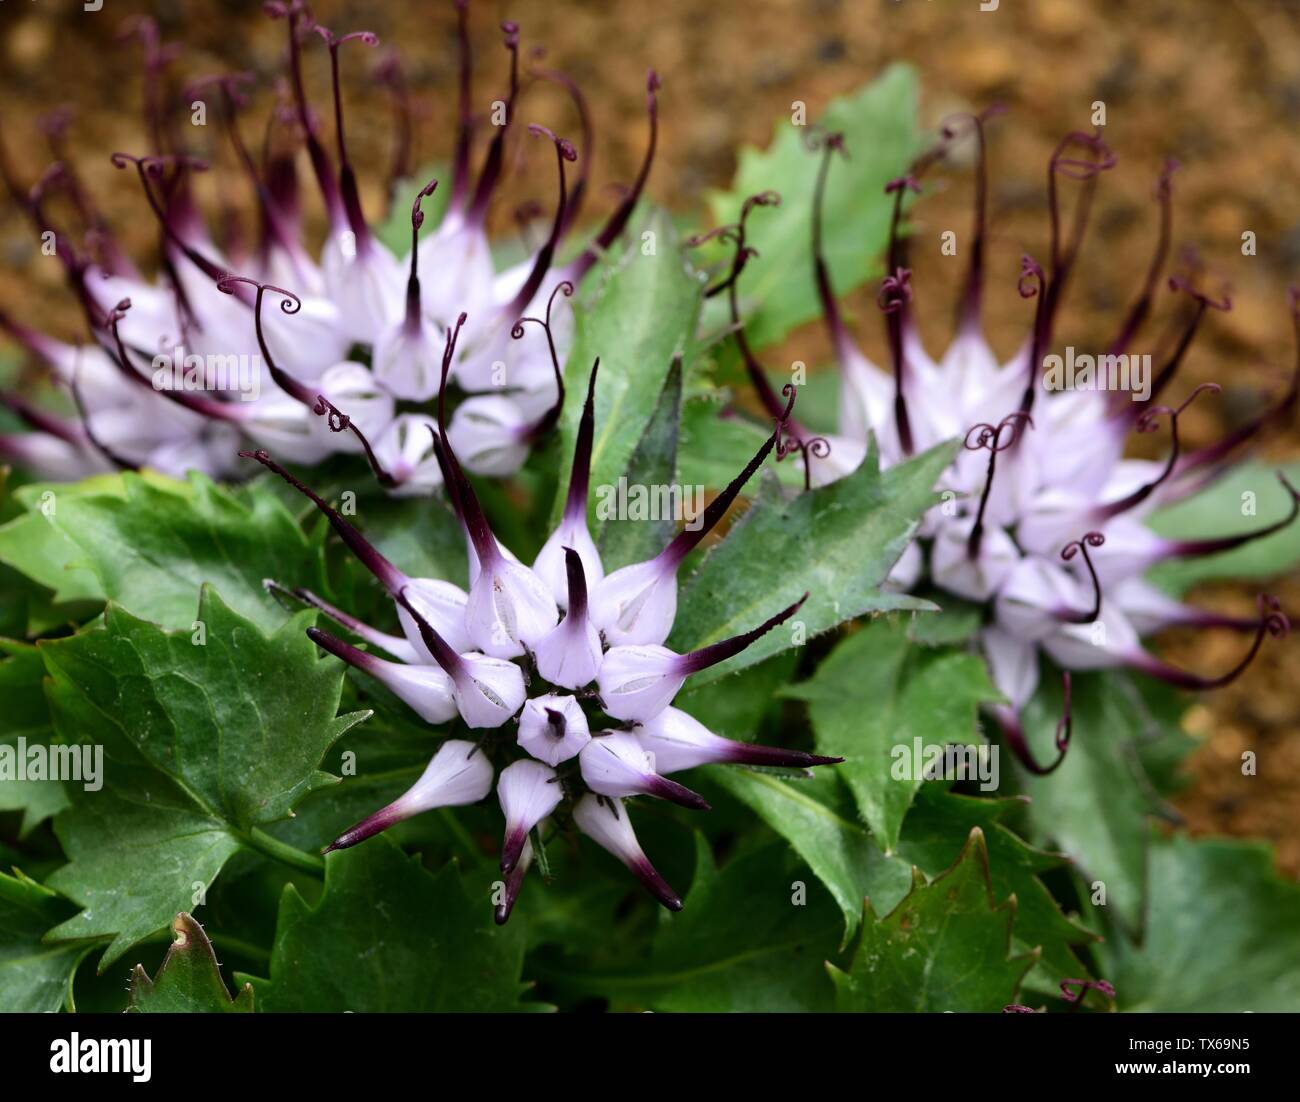 The Tufted Horned Rampion in flower. Stock Photo